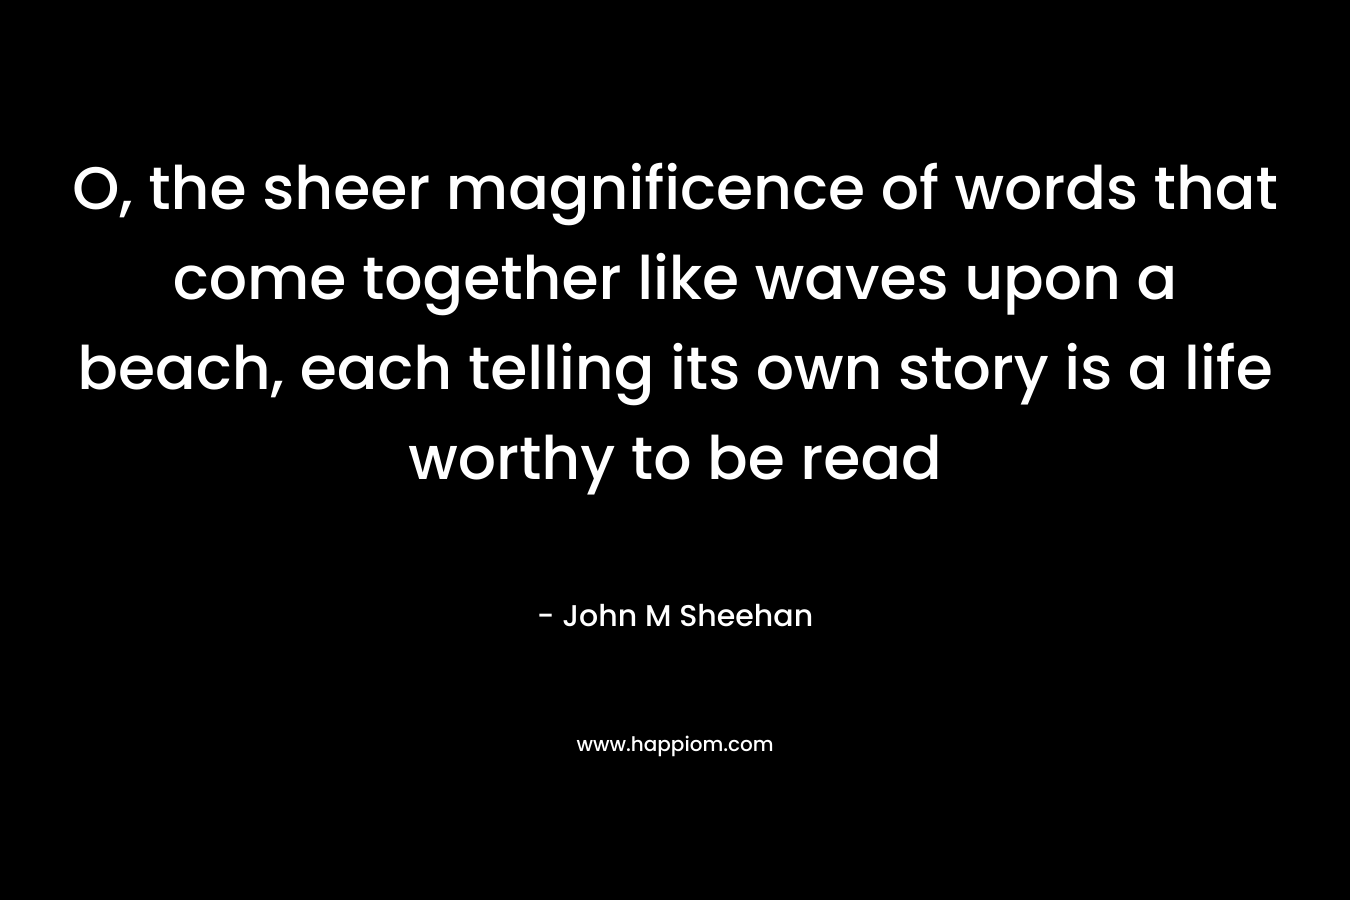 O, the sheer magnificence of words that come together like waves upon a beach, each telling its own story is a life worthy to be read – John M Sheehan